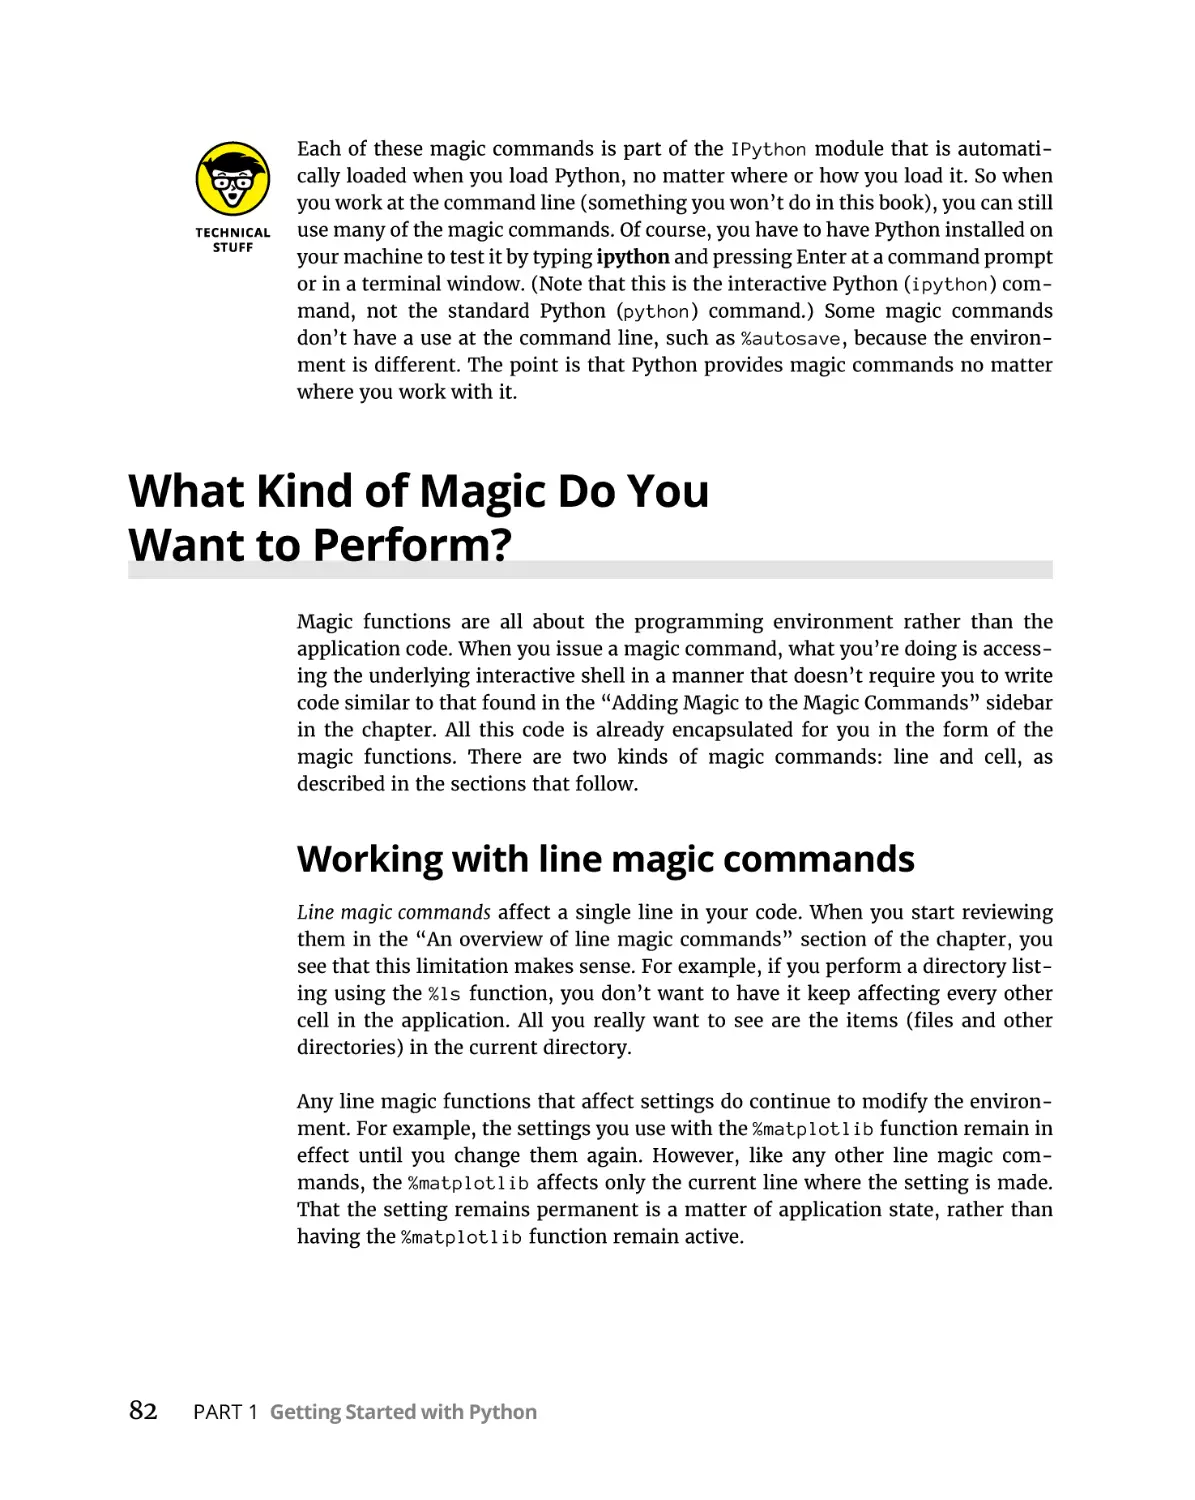 What Kind of Magic Do You Want to Perform?
Working with line magic commands